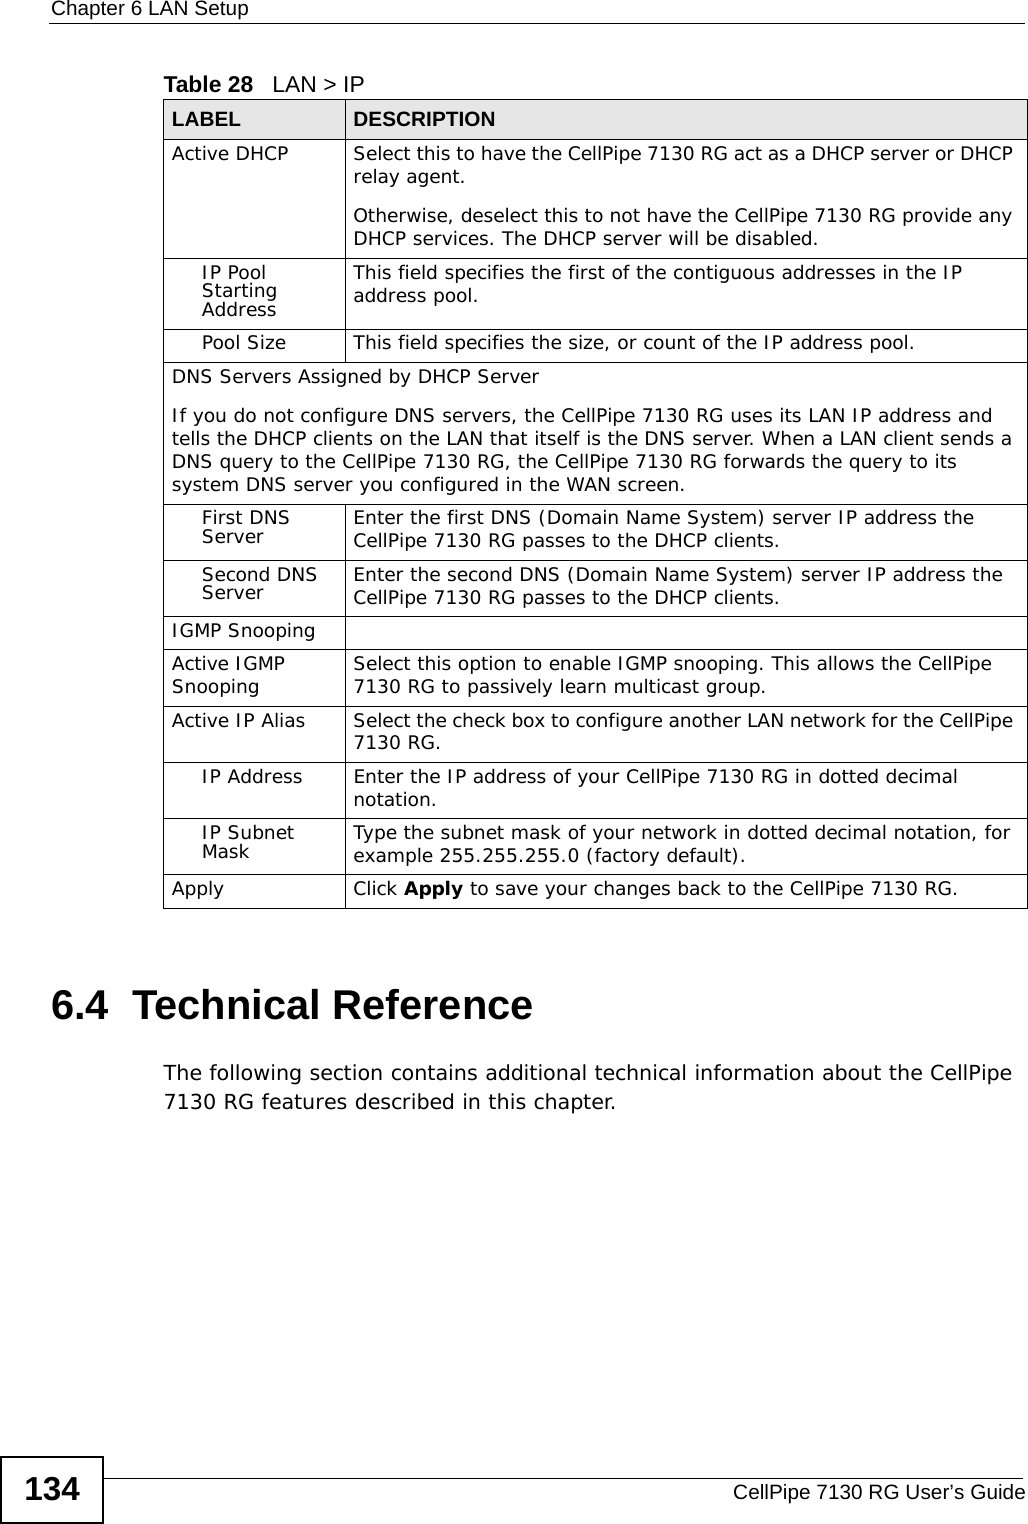 Chapter 6 LAN SetupCellPipe 7130 RG User’s Guide1346.4  Technical ReferenceThe following section contains additional technical information about the CellPipe 7130 RG features described in this chapter.Active DHCP  Select this to have the CellPipe 7130 RG act as a DHCP server or DHCP relay agent.Otherwise, deselect this to not have the CellPipe 7130 RG provide any DHCP services. The DHCP server will be disabled. IP Pool Starting AddressThis field specifies the first of the contiguous addresses in the IP address pool.Pool Size This field specifies the size, or count of the IP address pool.DNS Servers Assigned by DHCP ServerIf you do not configure DNS servers, the CellPipe 7130 RG uses its LAN IP address and tells the DHCP clients on the LAN that itself is the DNS server. When a LAN client sends a DNS query to the CellPipe 7130 RG, the CellPipe 7130 RG forwards the query to its system DNS server you configured in the WAN screen.First DNS Server Enter the first DNS (Domain Name System) server IP address the CellPipe 7130 RG passes to the DHCP clients. Second DNS Server Enter the second DNS (Domain Name System) server IP address the CellPipe 7130 RG passes to the DHCP clients. IGMP SnoopingActive IGMP Snooping Select this option to enable IGMP snooping. This allows the CellPipe 7130 RG to passively learn multicast group.Active IP Alias  Select the check box to configure another LAN network for the CellPipe 7130 RG.IP Address Enter the IP address of your CellPipe 7130 RG in dotted decimal notation. IP Subnet Mask Type the subnet mask of your network in dotted decimal notation, for example 255.255.255.0 (factory default).Apply Click Apply to save your changes back to the CellPipe 7130 RG.Table 28   LAN &gt; IPLABEL DESCRIPTION